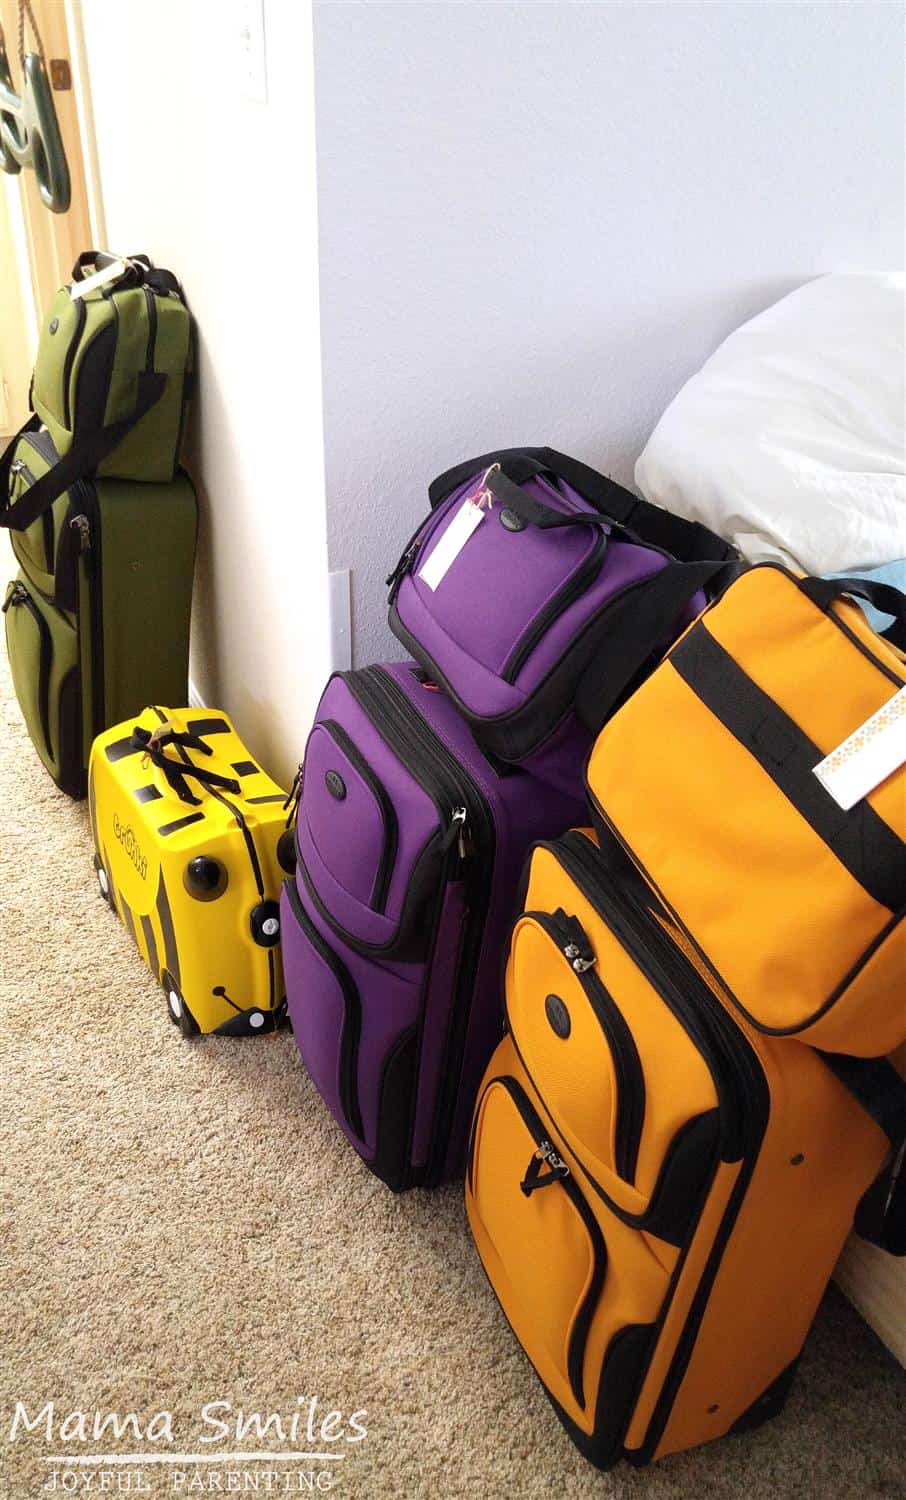 Traveling with kids can be rewarding, done right! Careful packing for trips with kids pays off big time. Great tips in this post!